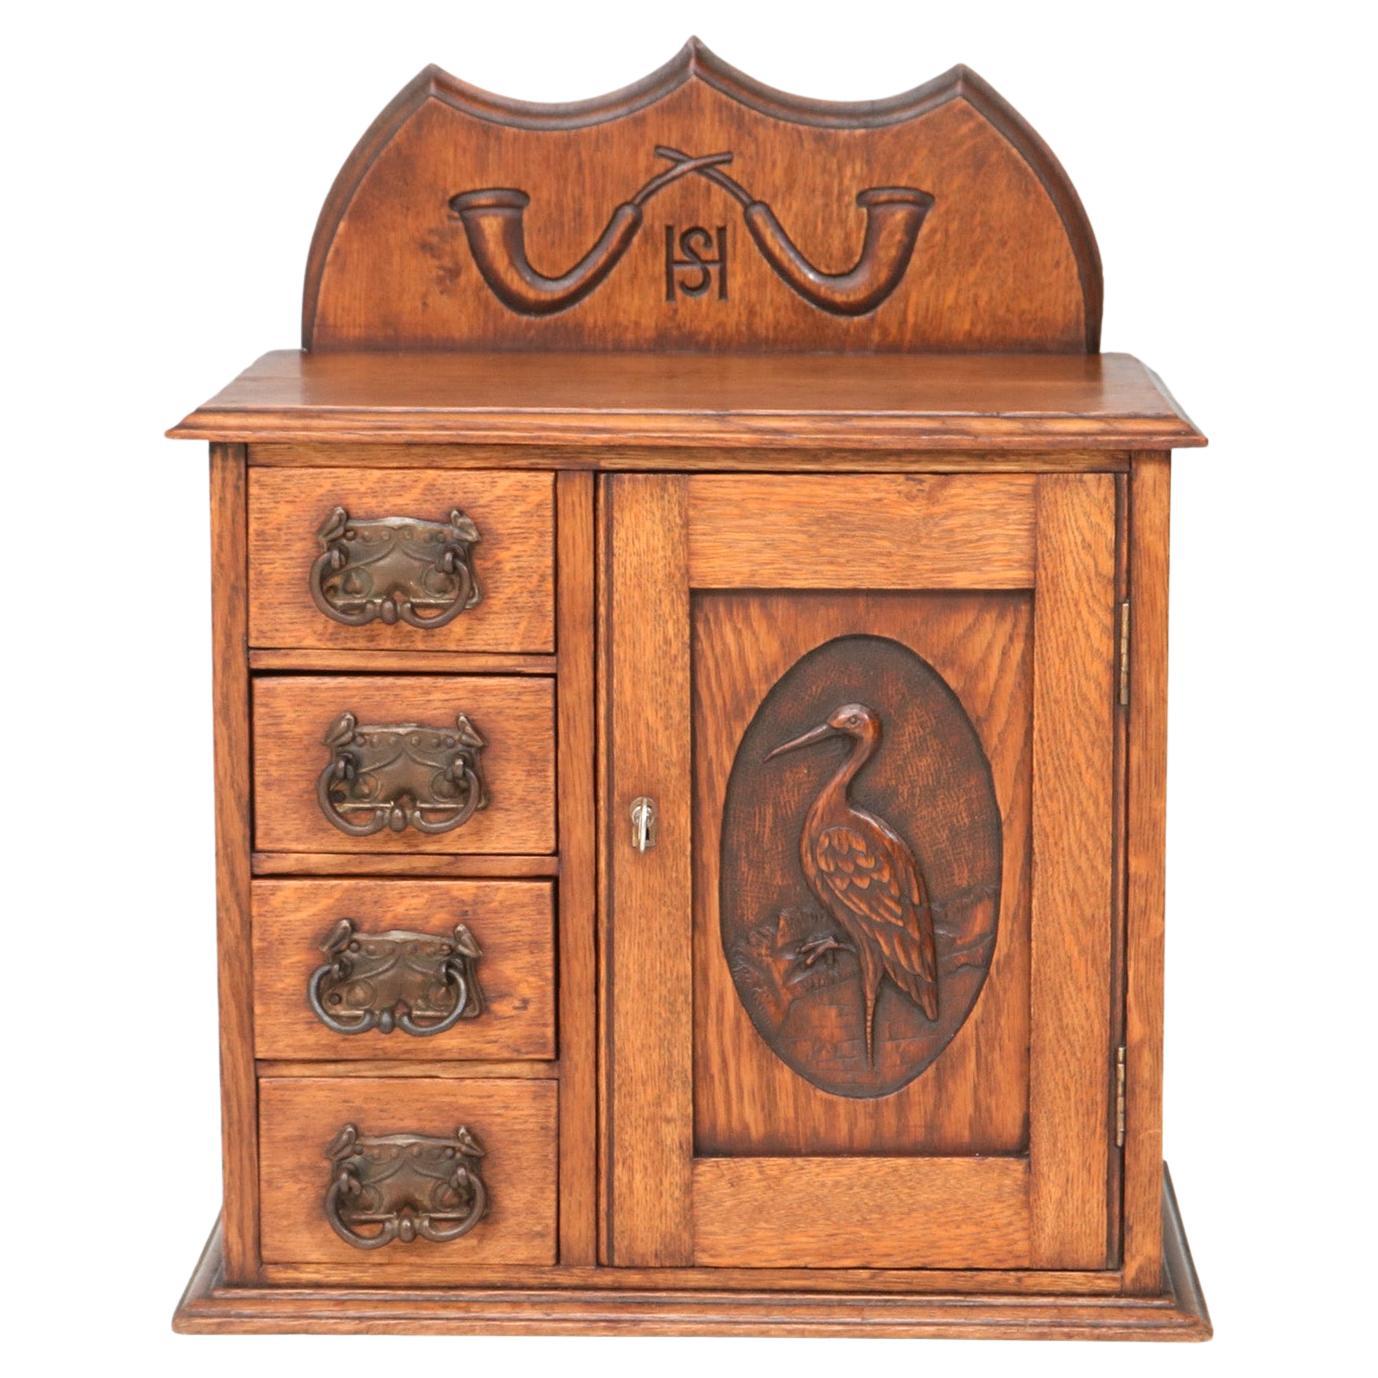 Oak Arts & Crafts Wall Cabinet with Hand-Carved Stork, 1900s